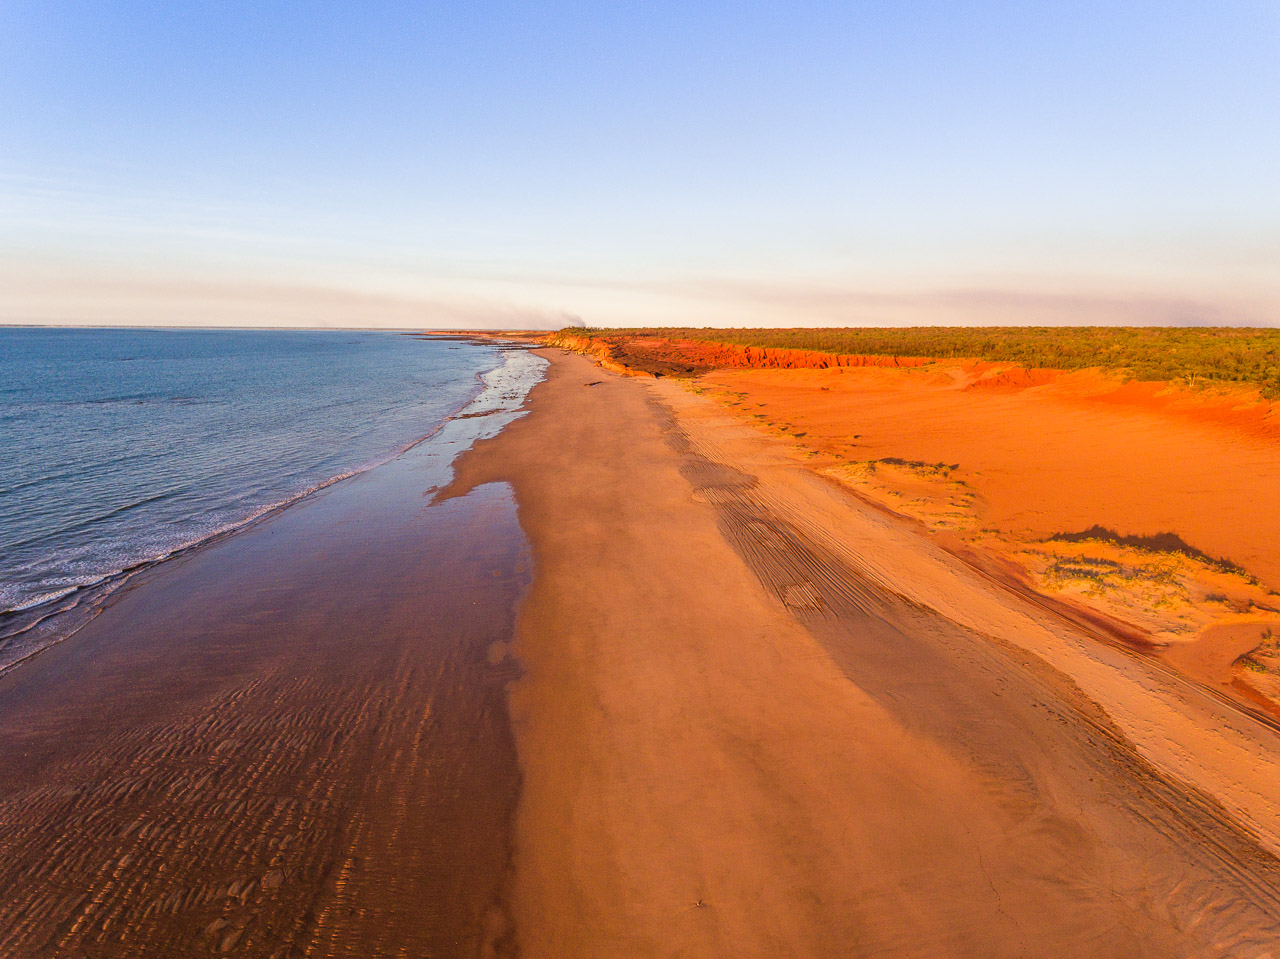 Drone image of the coast on the Dampier Peninsula